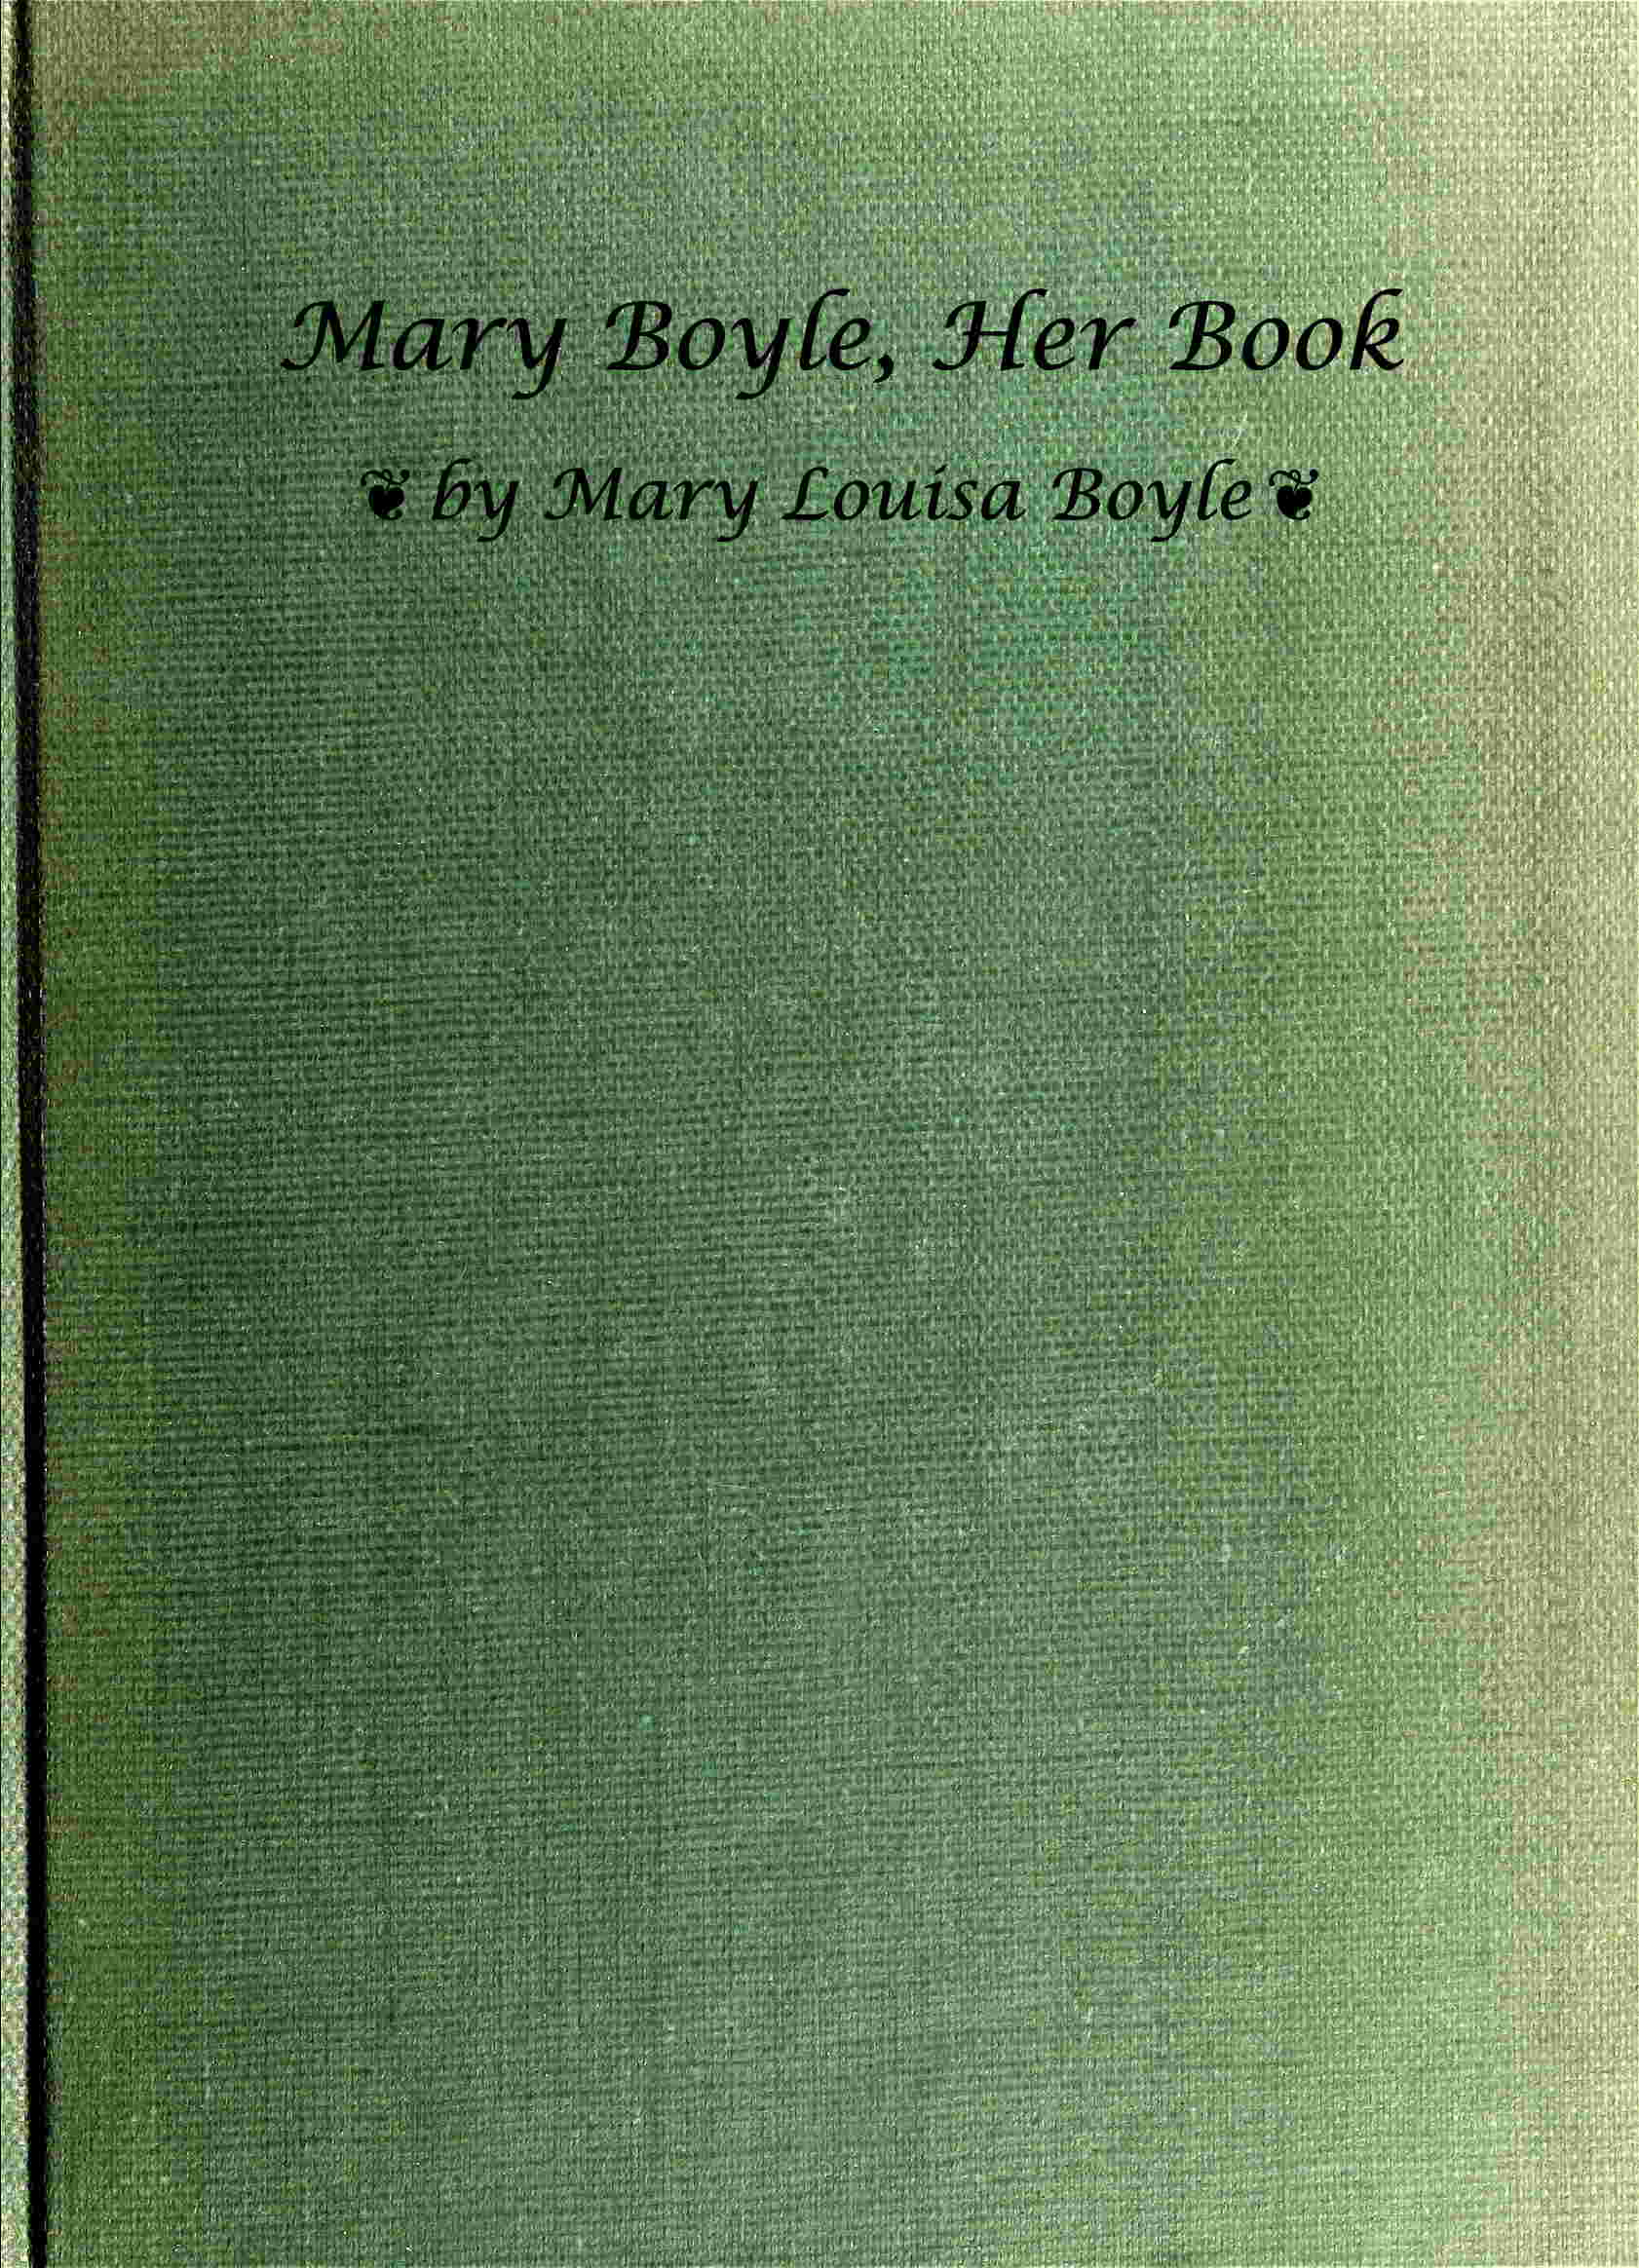 Mary Boyle, Her Book